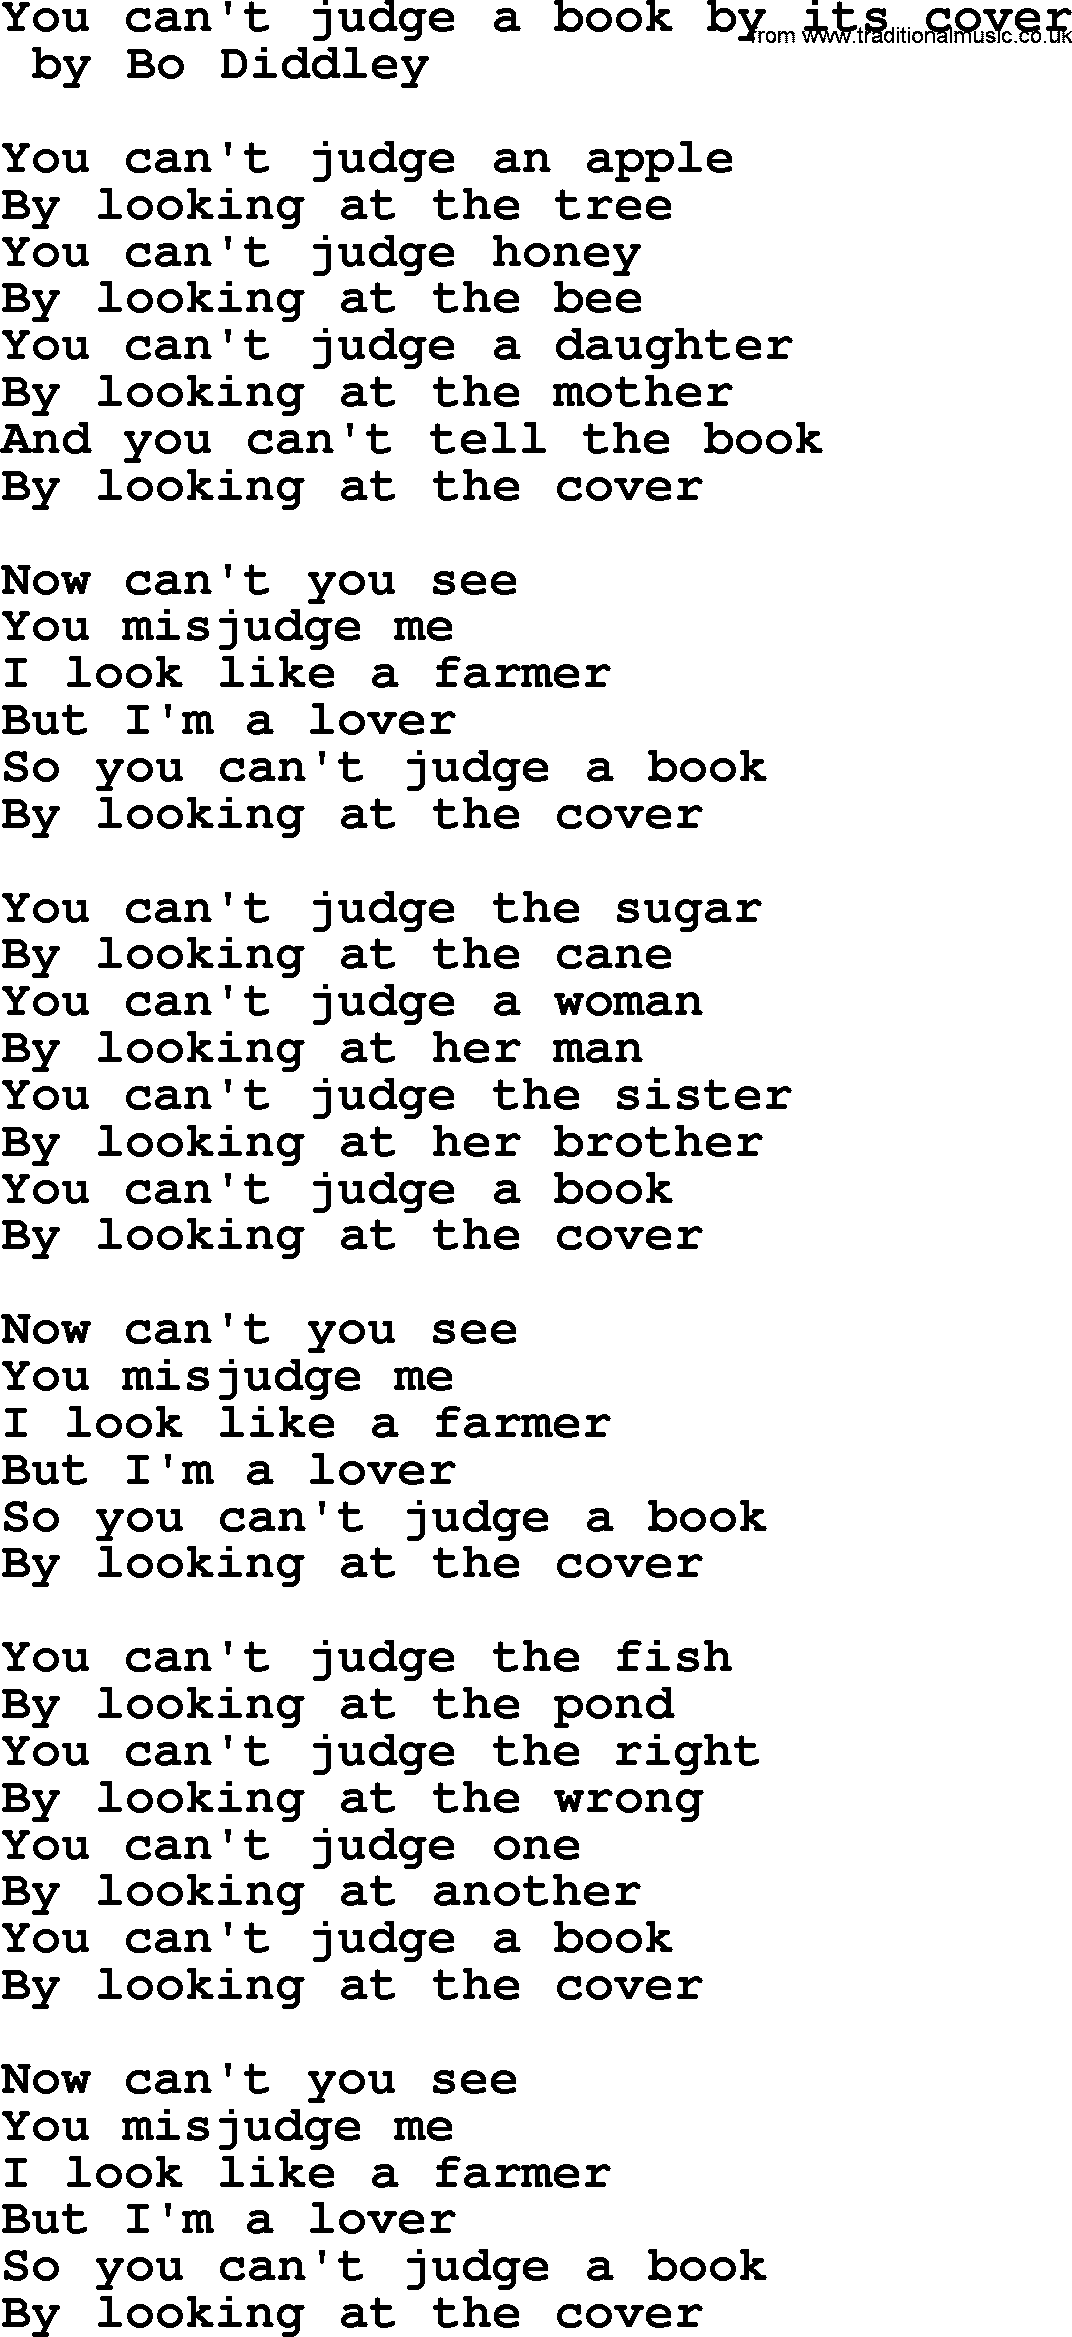 Bruce Springsteen song: You Can't Judge A Book By Its Cover lyrics